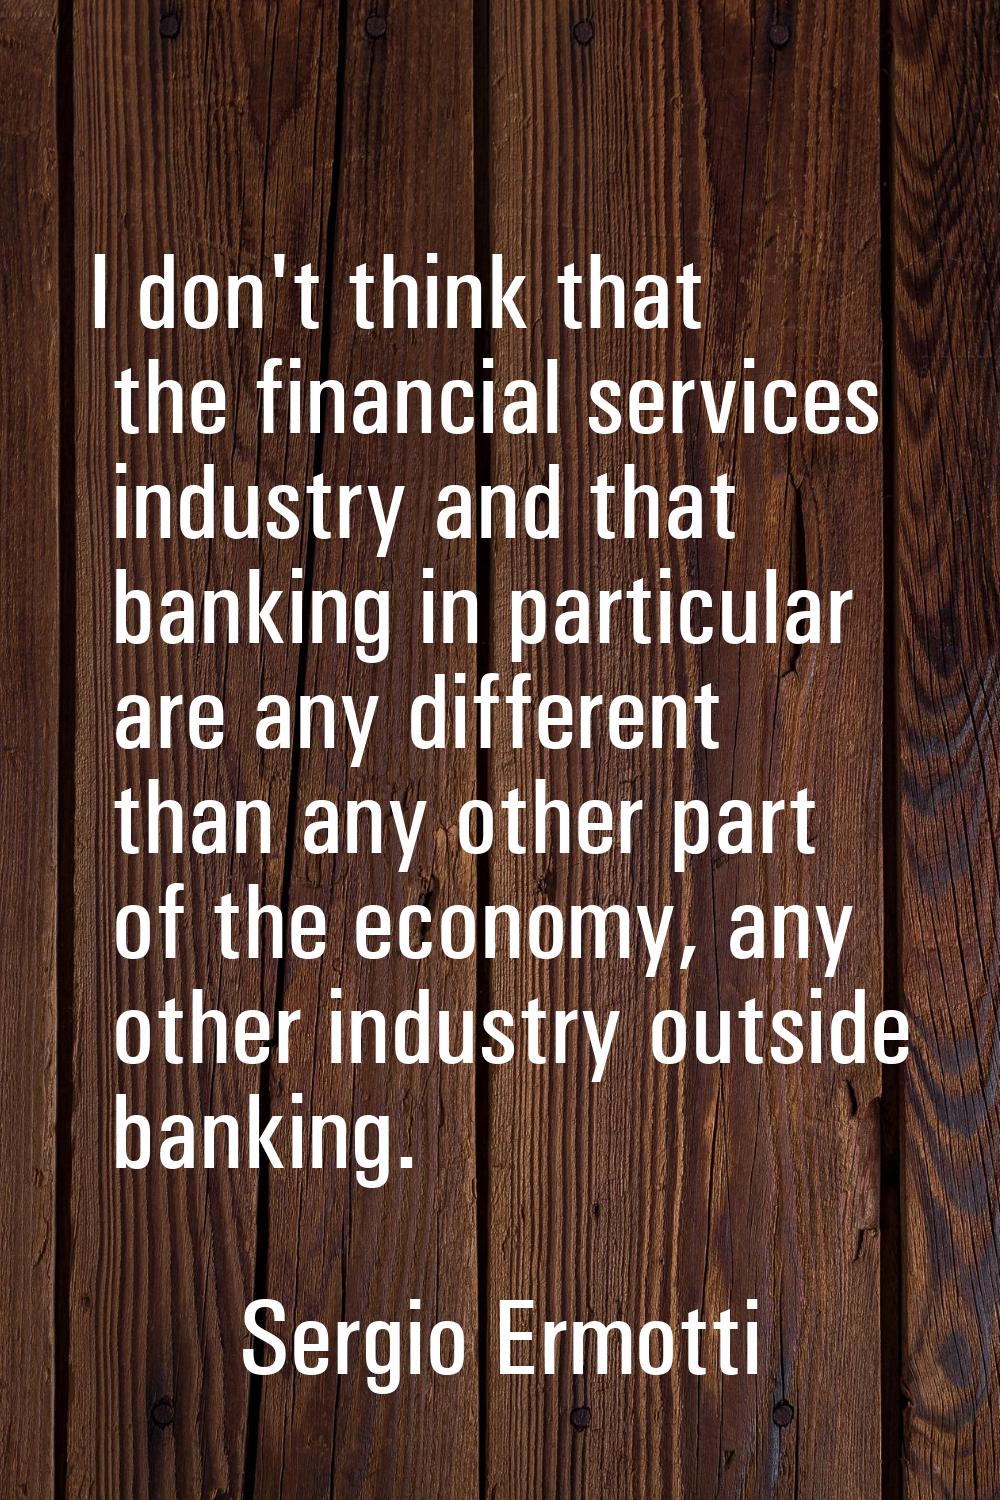 I don't think that the financial services industry and that banking in particular are any different